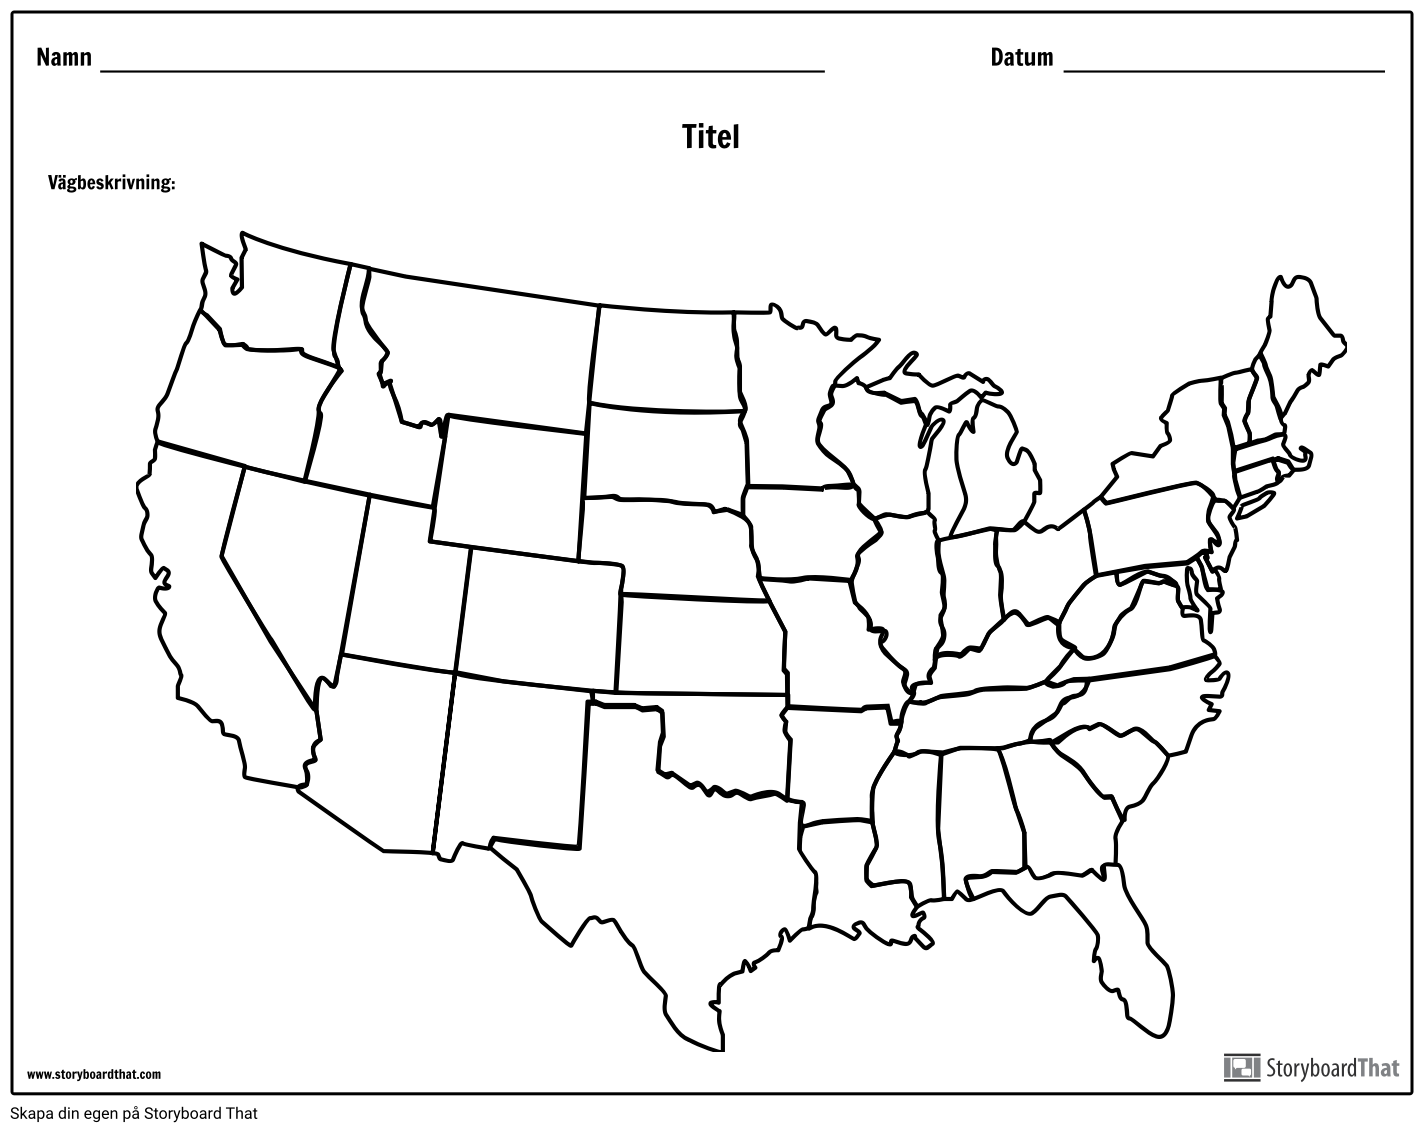 united-states-map-storyboard-per-sv-examples